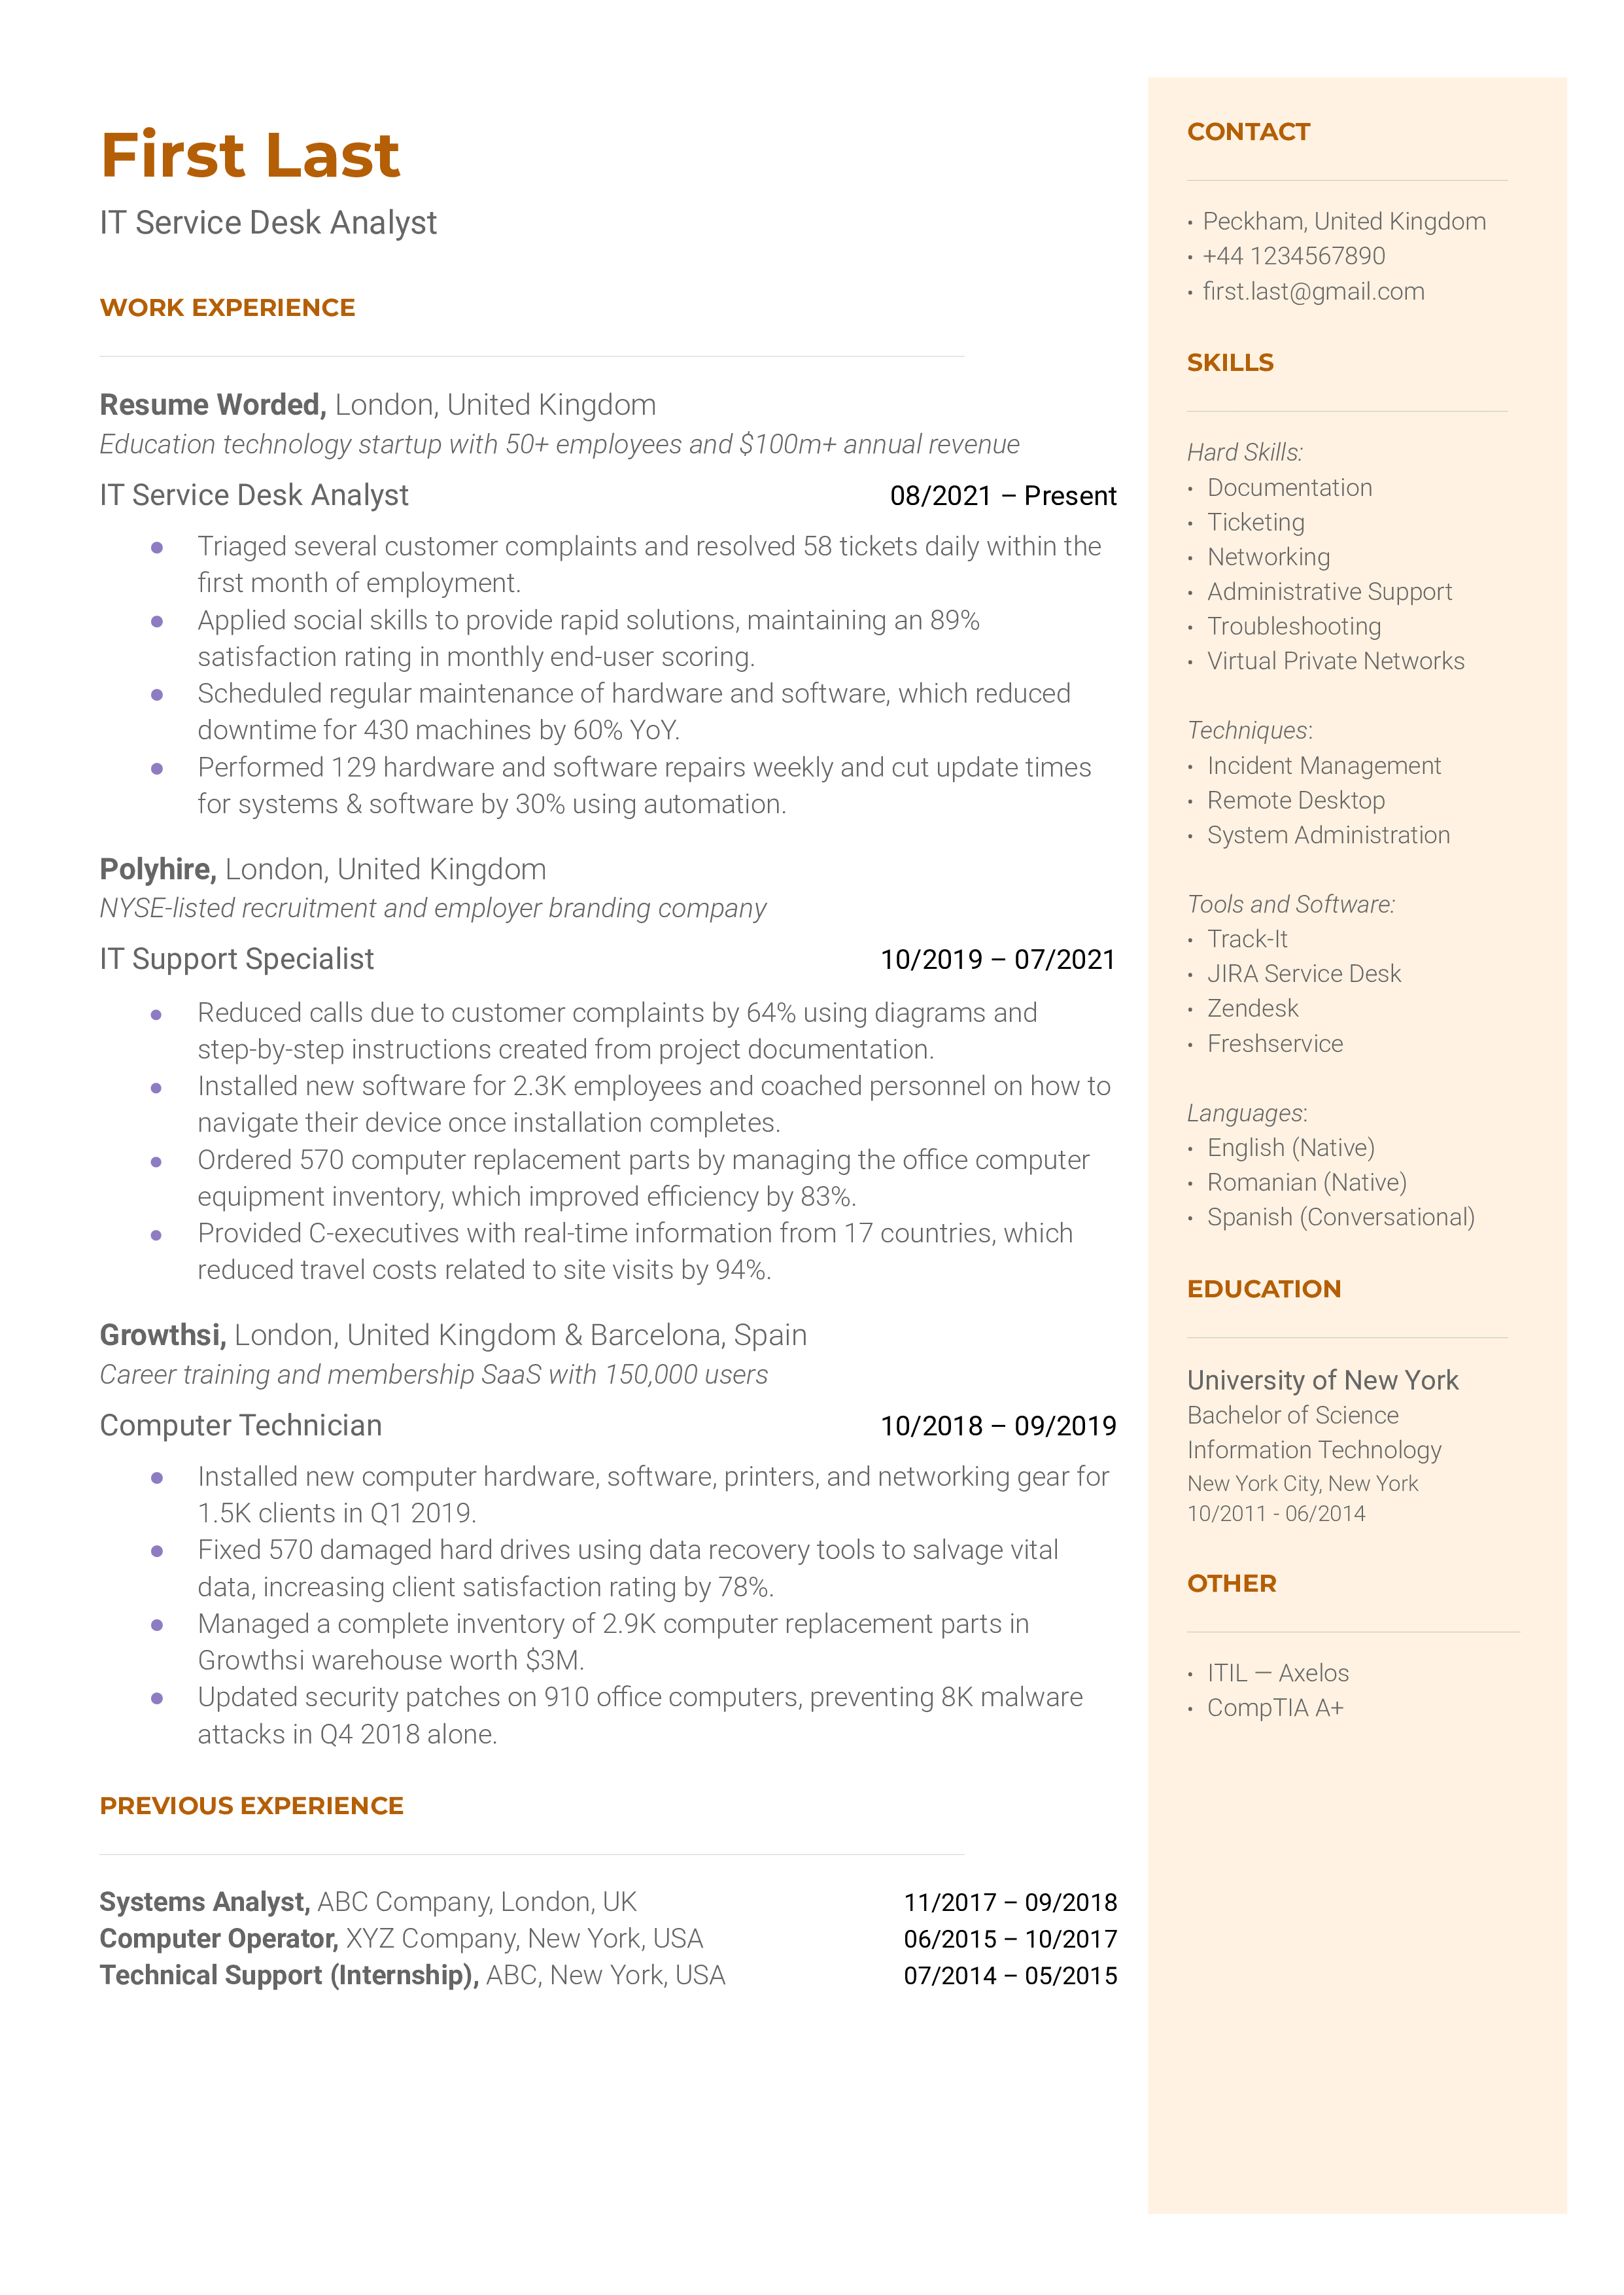 A IT service desk analyst resume template that focuses on IT keywords